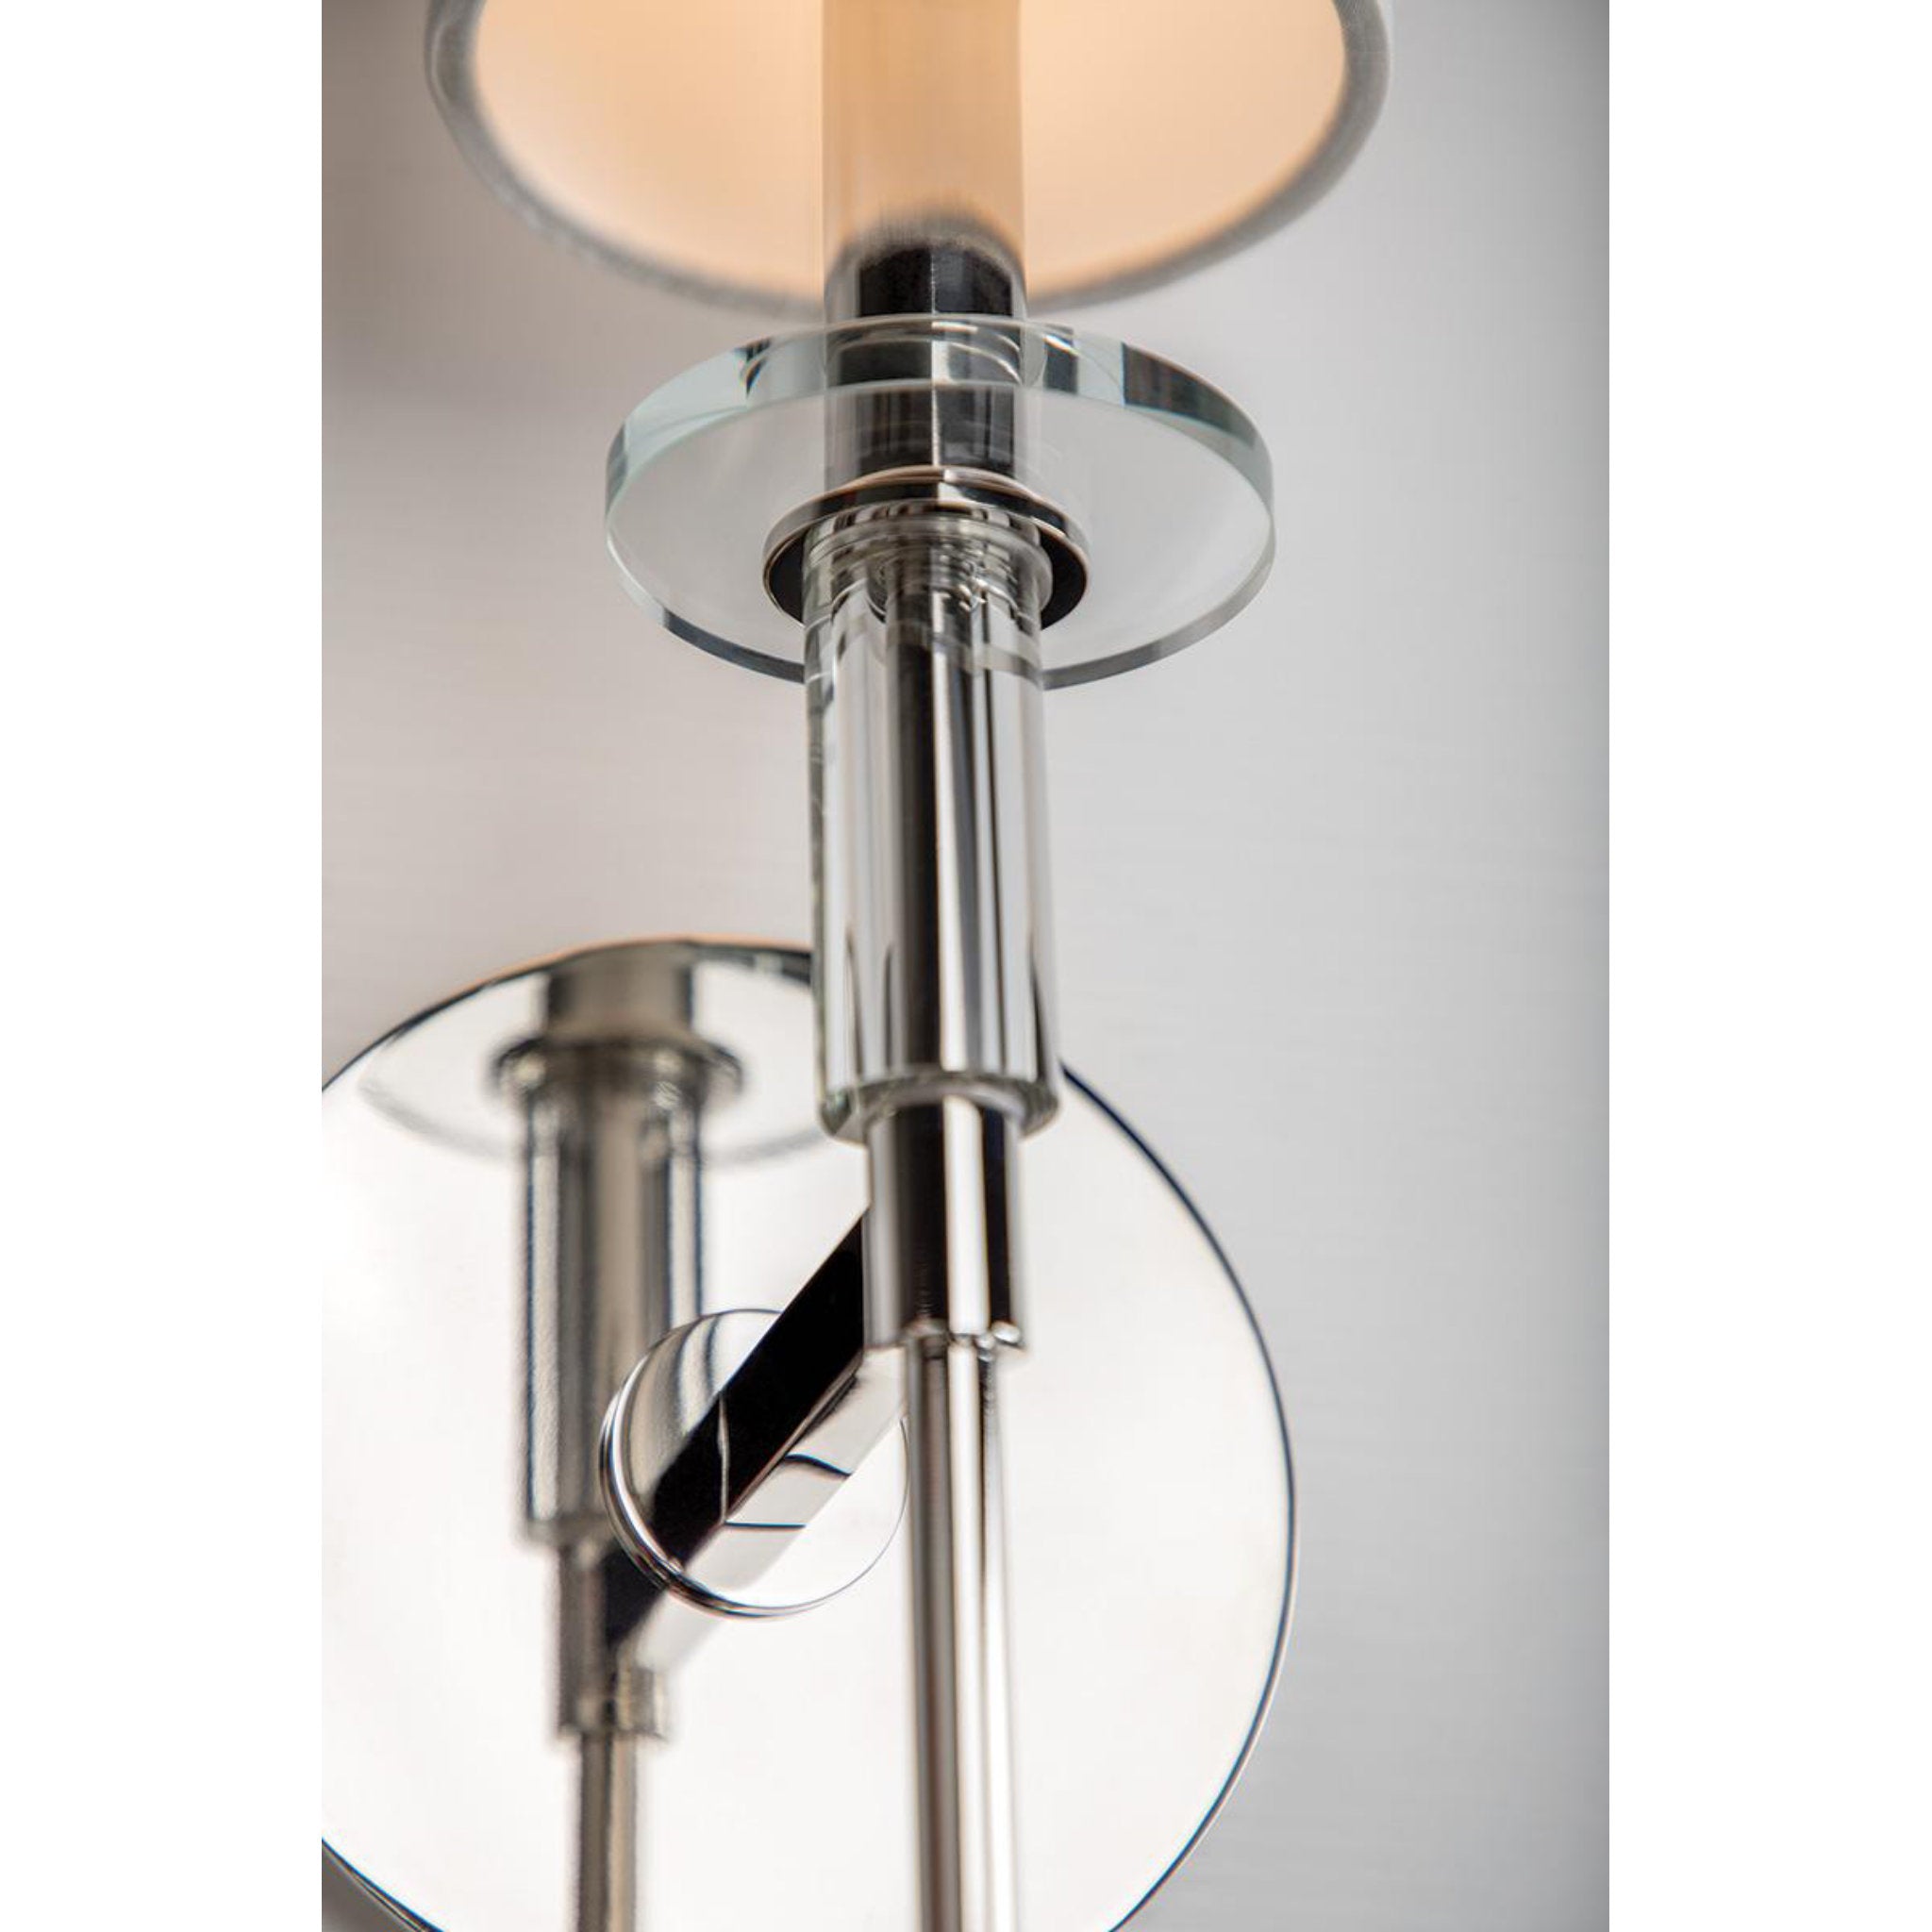 Amherst 1 Light Wall Sconce in Polished Nickel